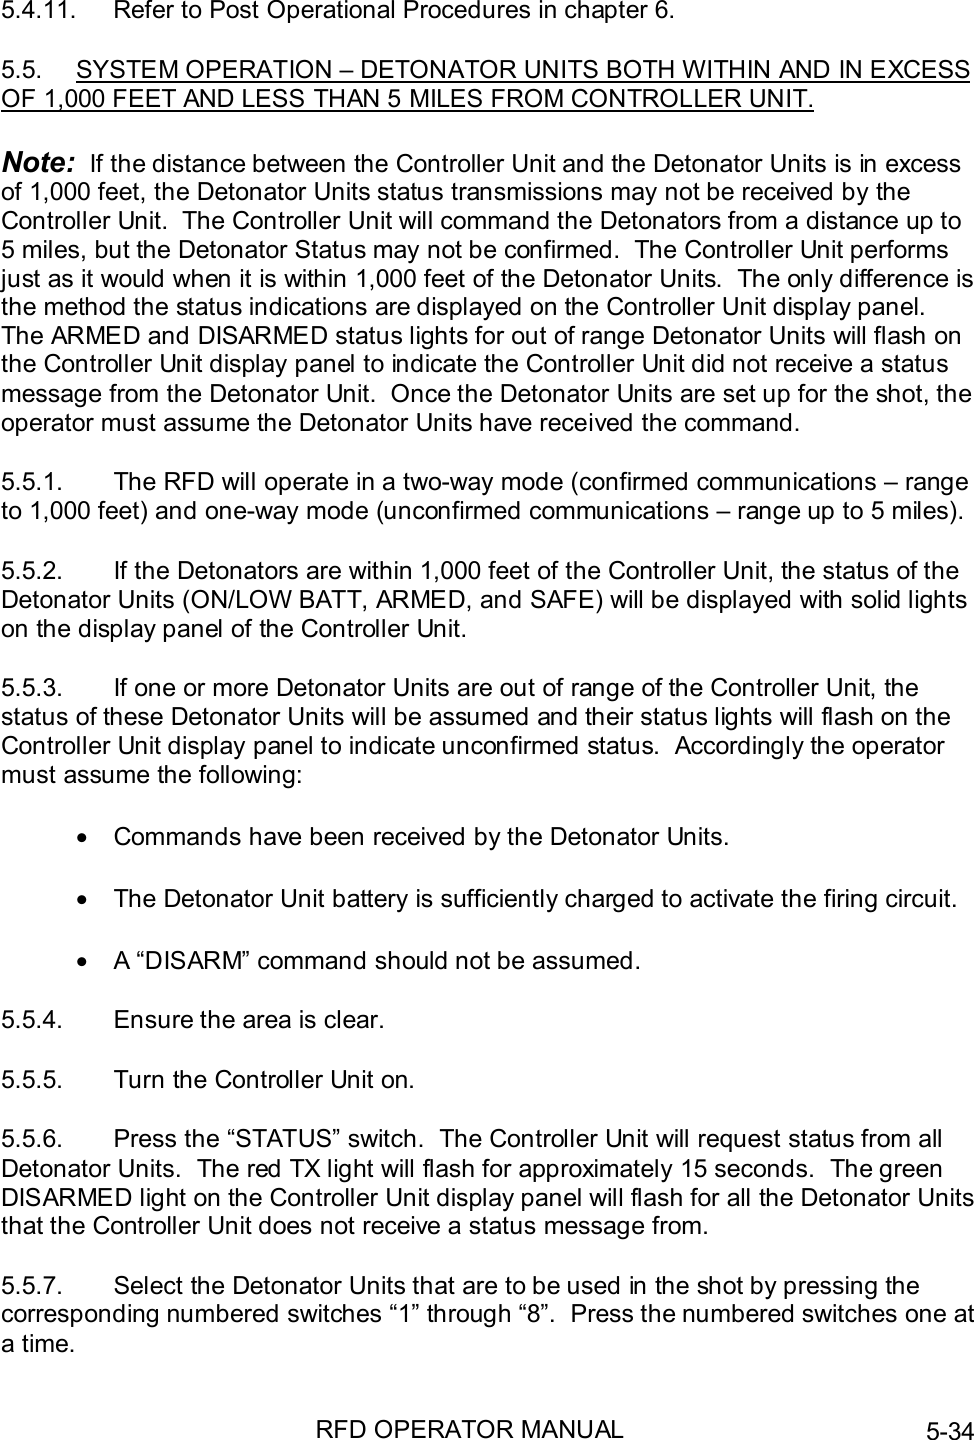 RFD OPERATOR MANUAL 5-345.4.11.  Refer to Post Operational Procedures in chapter 6.5.5.  SYSTEM OPERATION – DETONATOR UNITS BOTH WITHIN AND IN EXCESSOF 1,000 FEET AND LESS THAN 5 MILES FROM CONTROLLER UNIT.Note:  If the distance between the Controller Unit and the Detonator Units is in excessof 1,000 feet, the Detonator Units status transmissions may not be received by theController Unit.  The Controller Unit will command the Detonators from a distance up to5 miles, but the Detonator Status may not be confirmed.  The Controller Unit performsjust as it would when it is within 1,000 feet of the Detonator Units.  The only difference isthe method the status indications are displayed on the Controller Unit display panel.The ARMED and DISARMED status lights for out of range Detonator Units will flash onthe Controller Unit display panel to indicate the Controller Unit did not receive a statusmessage from the Detonator Unit.  Once the Detonator Units are set up for the shot, theoperator must assume the Detonator Units have received the command.5.5.1.  The RFD will operate in a two-way mode (confirmed communications – rangeto 1,000 feet) and one-way mode (unconfirmed communications – range up to 5 miles).5.5.2.  If the Detonators are within 1,000 feet of the Controller Unit, the status of theDetonator Units (ON/LOW BATT, ARMED, and SAFE) will be displayed with solid lightson the display panel of the Controller Unit.5.5.3.  If one or more Detonator Units are out of range of the Controller Unit, thestatus of these Detonator Units will be assumed and their status lights will flash on theController Unit display panel to indicate unconfirmed status.  Accordingly the operatormust assume the following:•  Commands have been received by the Detonator Units.•  The Detonator Unit battery is sufficiently charged to activate the firing circuit.•  A “DISARM” command should not be assumed.5.5.4.  Ensure the area is clear.5.5.5.  Turn the Controller Unit on.5.5.6.  Press the “STATUS” switch.  The Controller Unit will request status from allDetonator Units.  The red TX light will flash for approximately 15 seconds.  The greenDISARMED light on the Controller Unit display panel will flash for all the Detonator Unitsthat the Controller Unit does not receive a status message from.5.5.7.  Select the Detonator Units that are to be used in the shot by pressing thecorresponding numbered switches “1” through “8”.  Press the numbered switches one ata time.